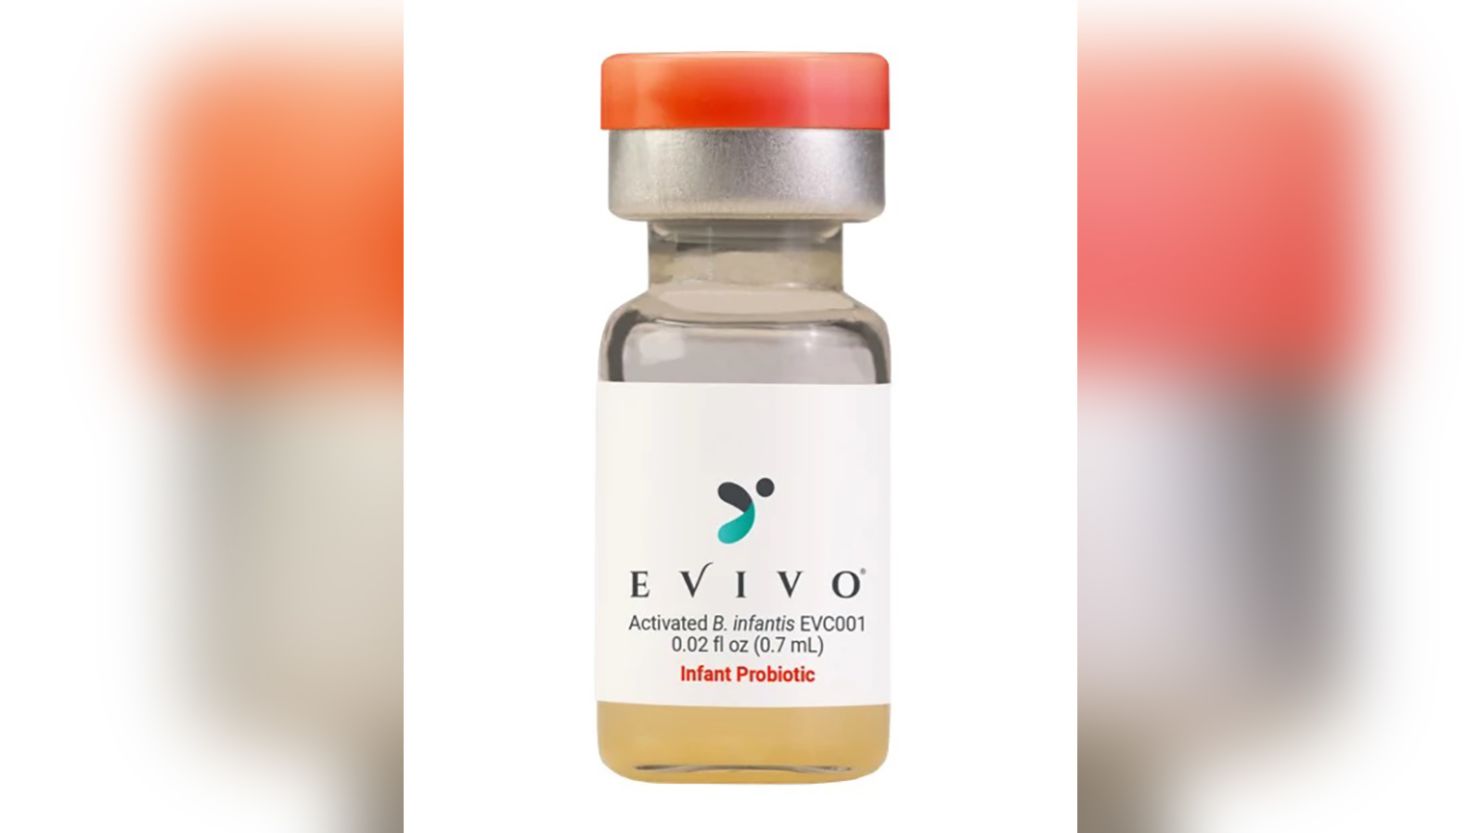 t\the US Food and Drug Administration is warning hospitals against giving probiotics to infants born prematurely. The FDA's warning mentions Evivo with MCT oil specifically.